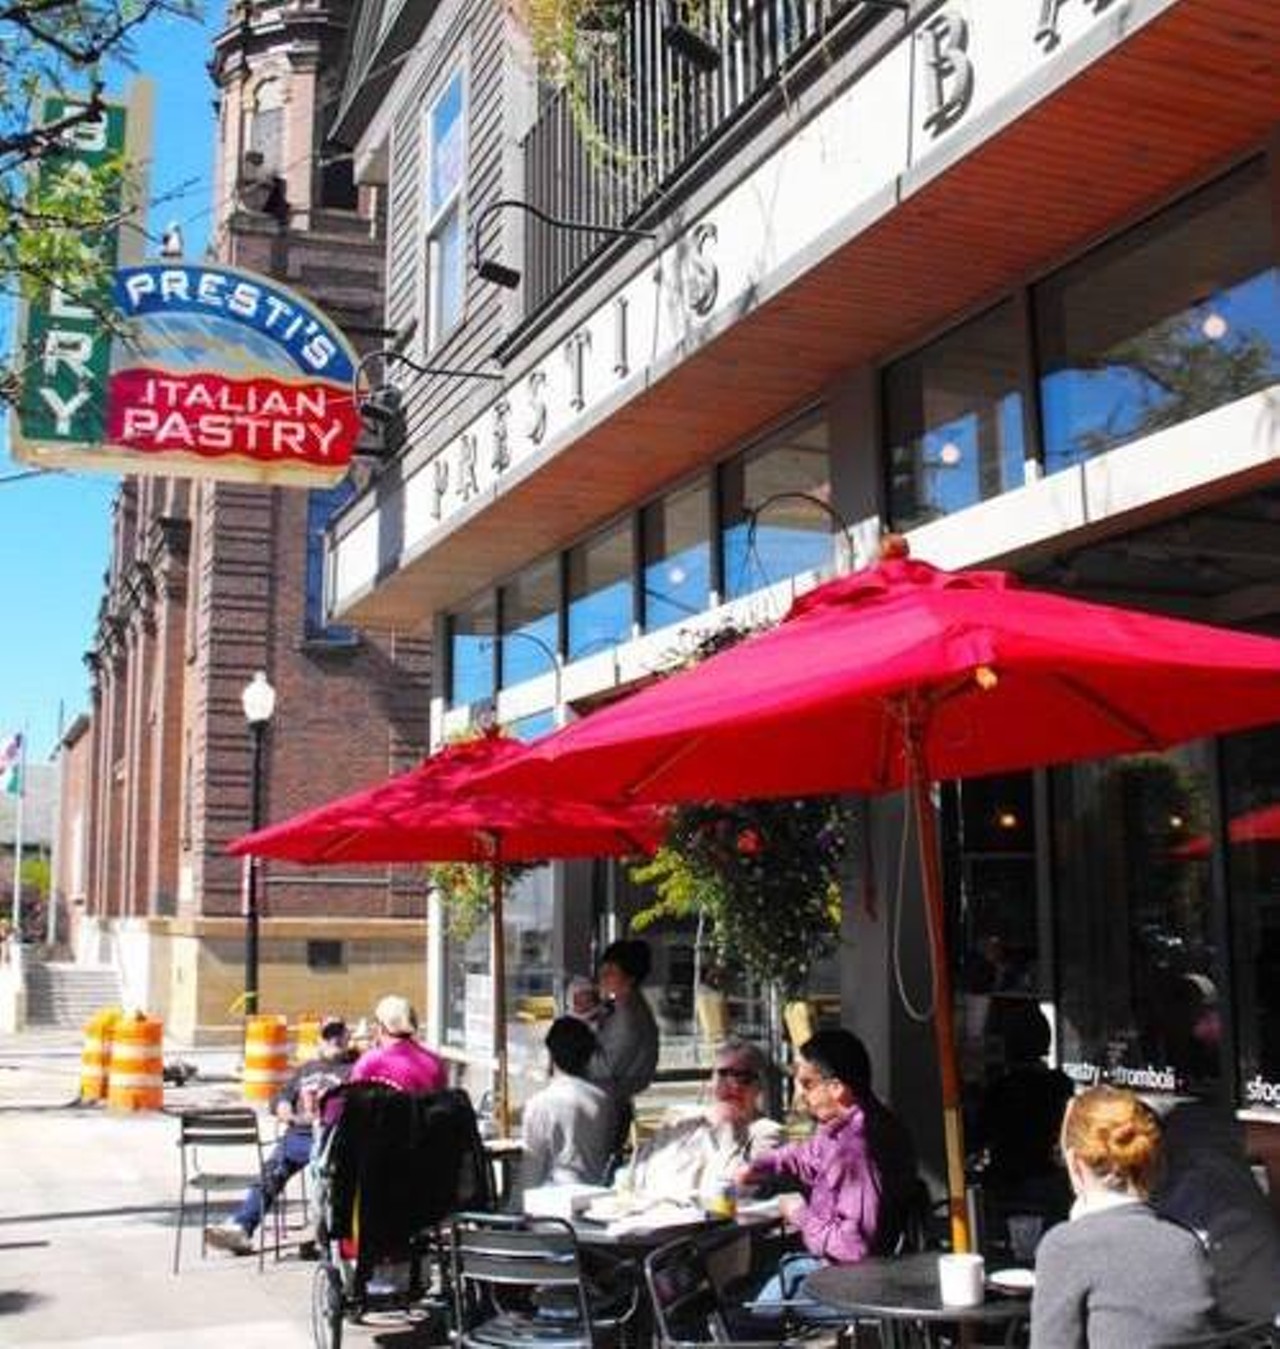  Presti&#146;s Bakery
12101 Mayfield Rd., Cleveland
Presti&#146;s has been a staple of Little Italy since 1943. The renowned bakery, in addition to their Italian desserts like tiramisu, also is a great spot to hang out at outside during the warm months.
Photo via Presti&#146;s Bakery/Facebook